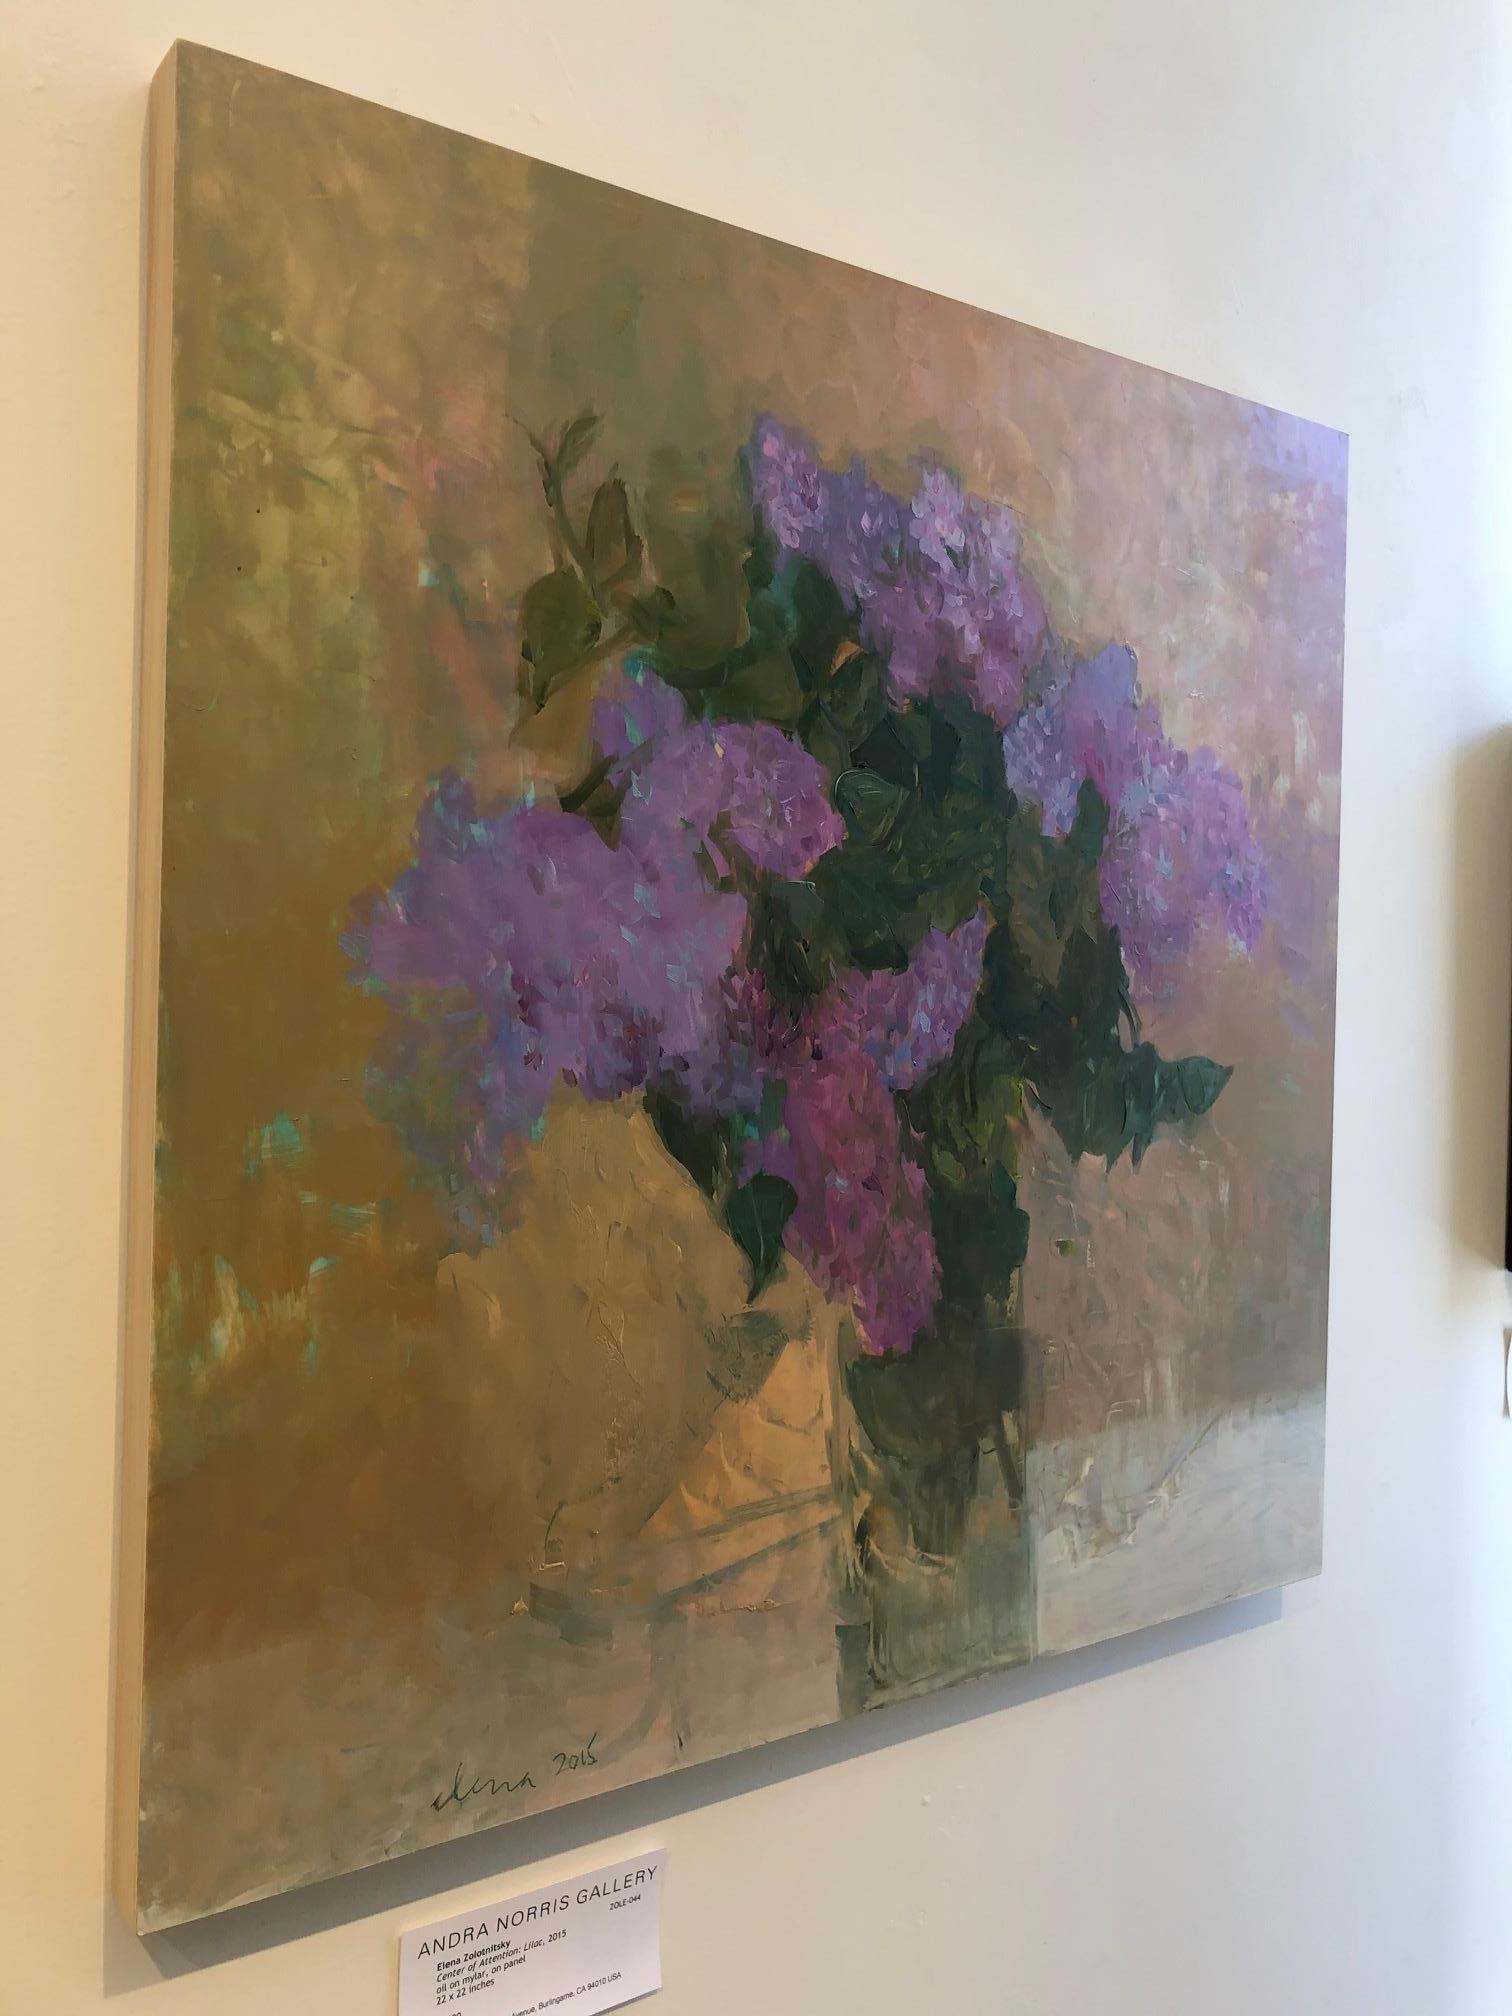 'Center of Attention' is exactly that, with its purple, lilac, lavender and green, floral arrangement of Lilacs in a crystal vase. Oil on mylar, mounted on panel, 22 x 22 inches. Framing is not necessary with this contemporary painting with its